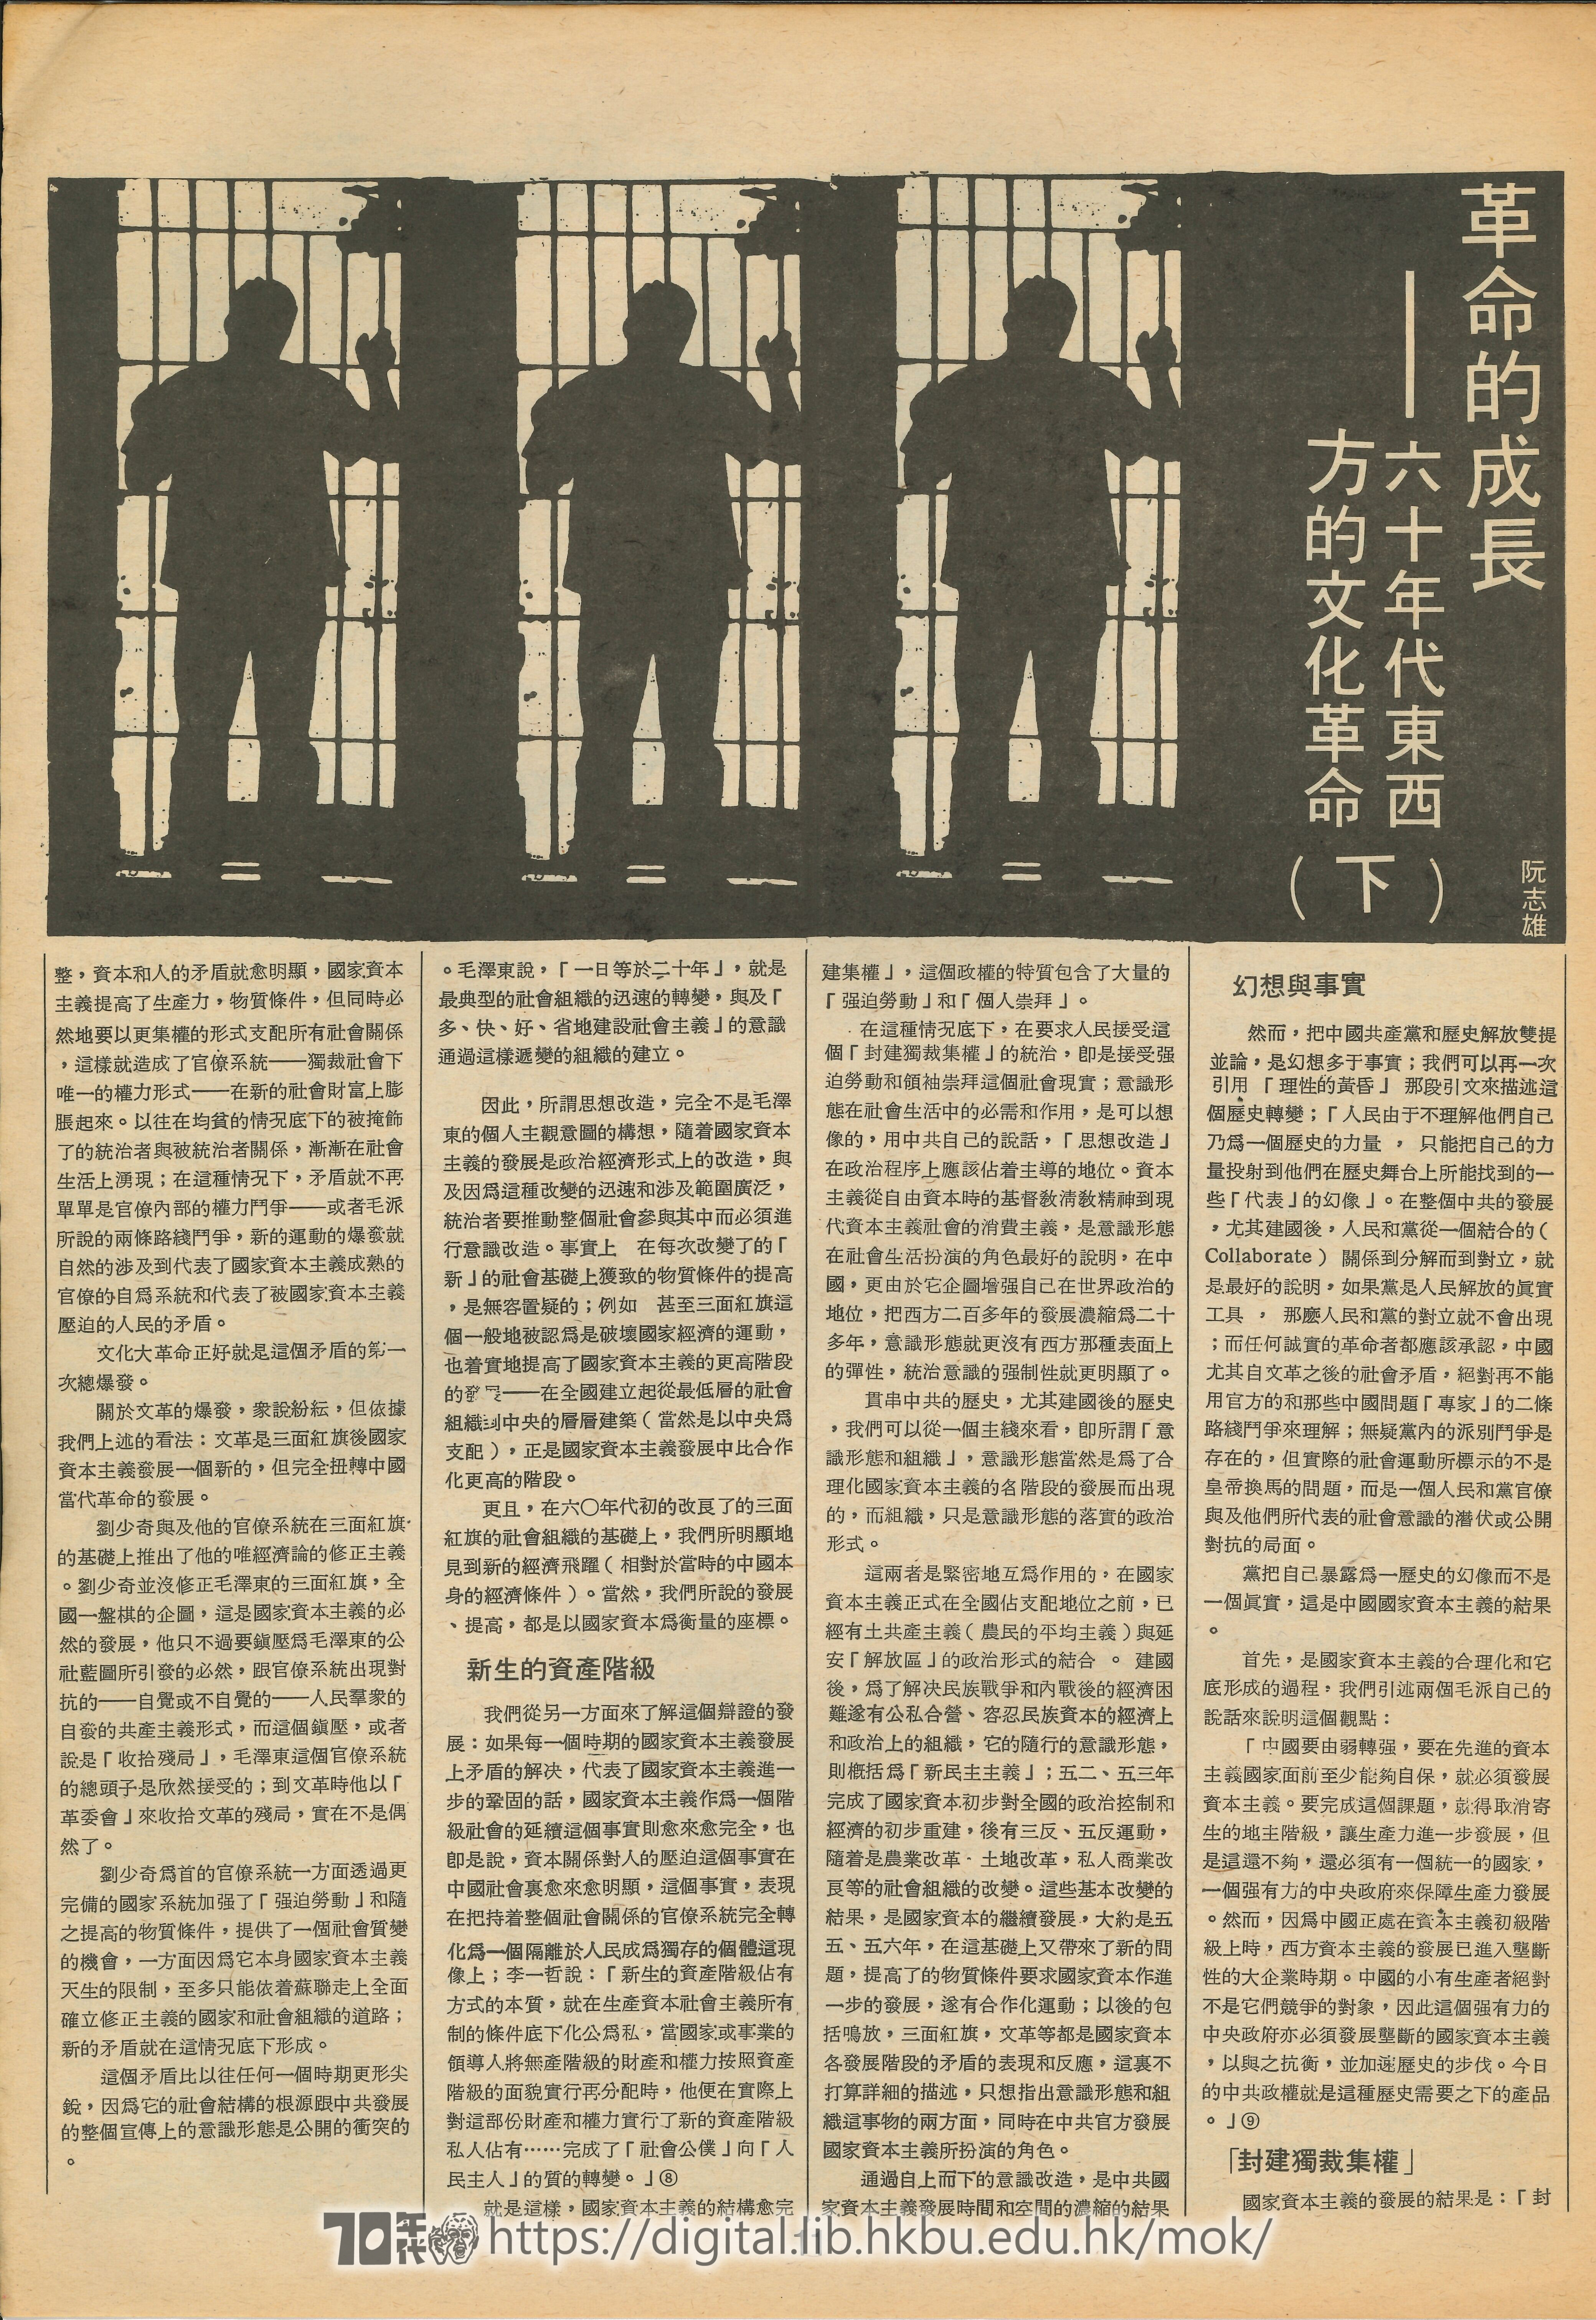  ���������2��� Growth of a revolution - cultural revolution in the east in the 1960s II 沅志雄 